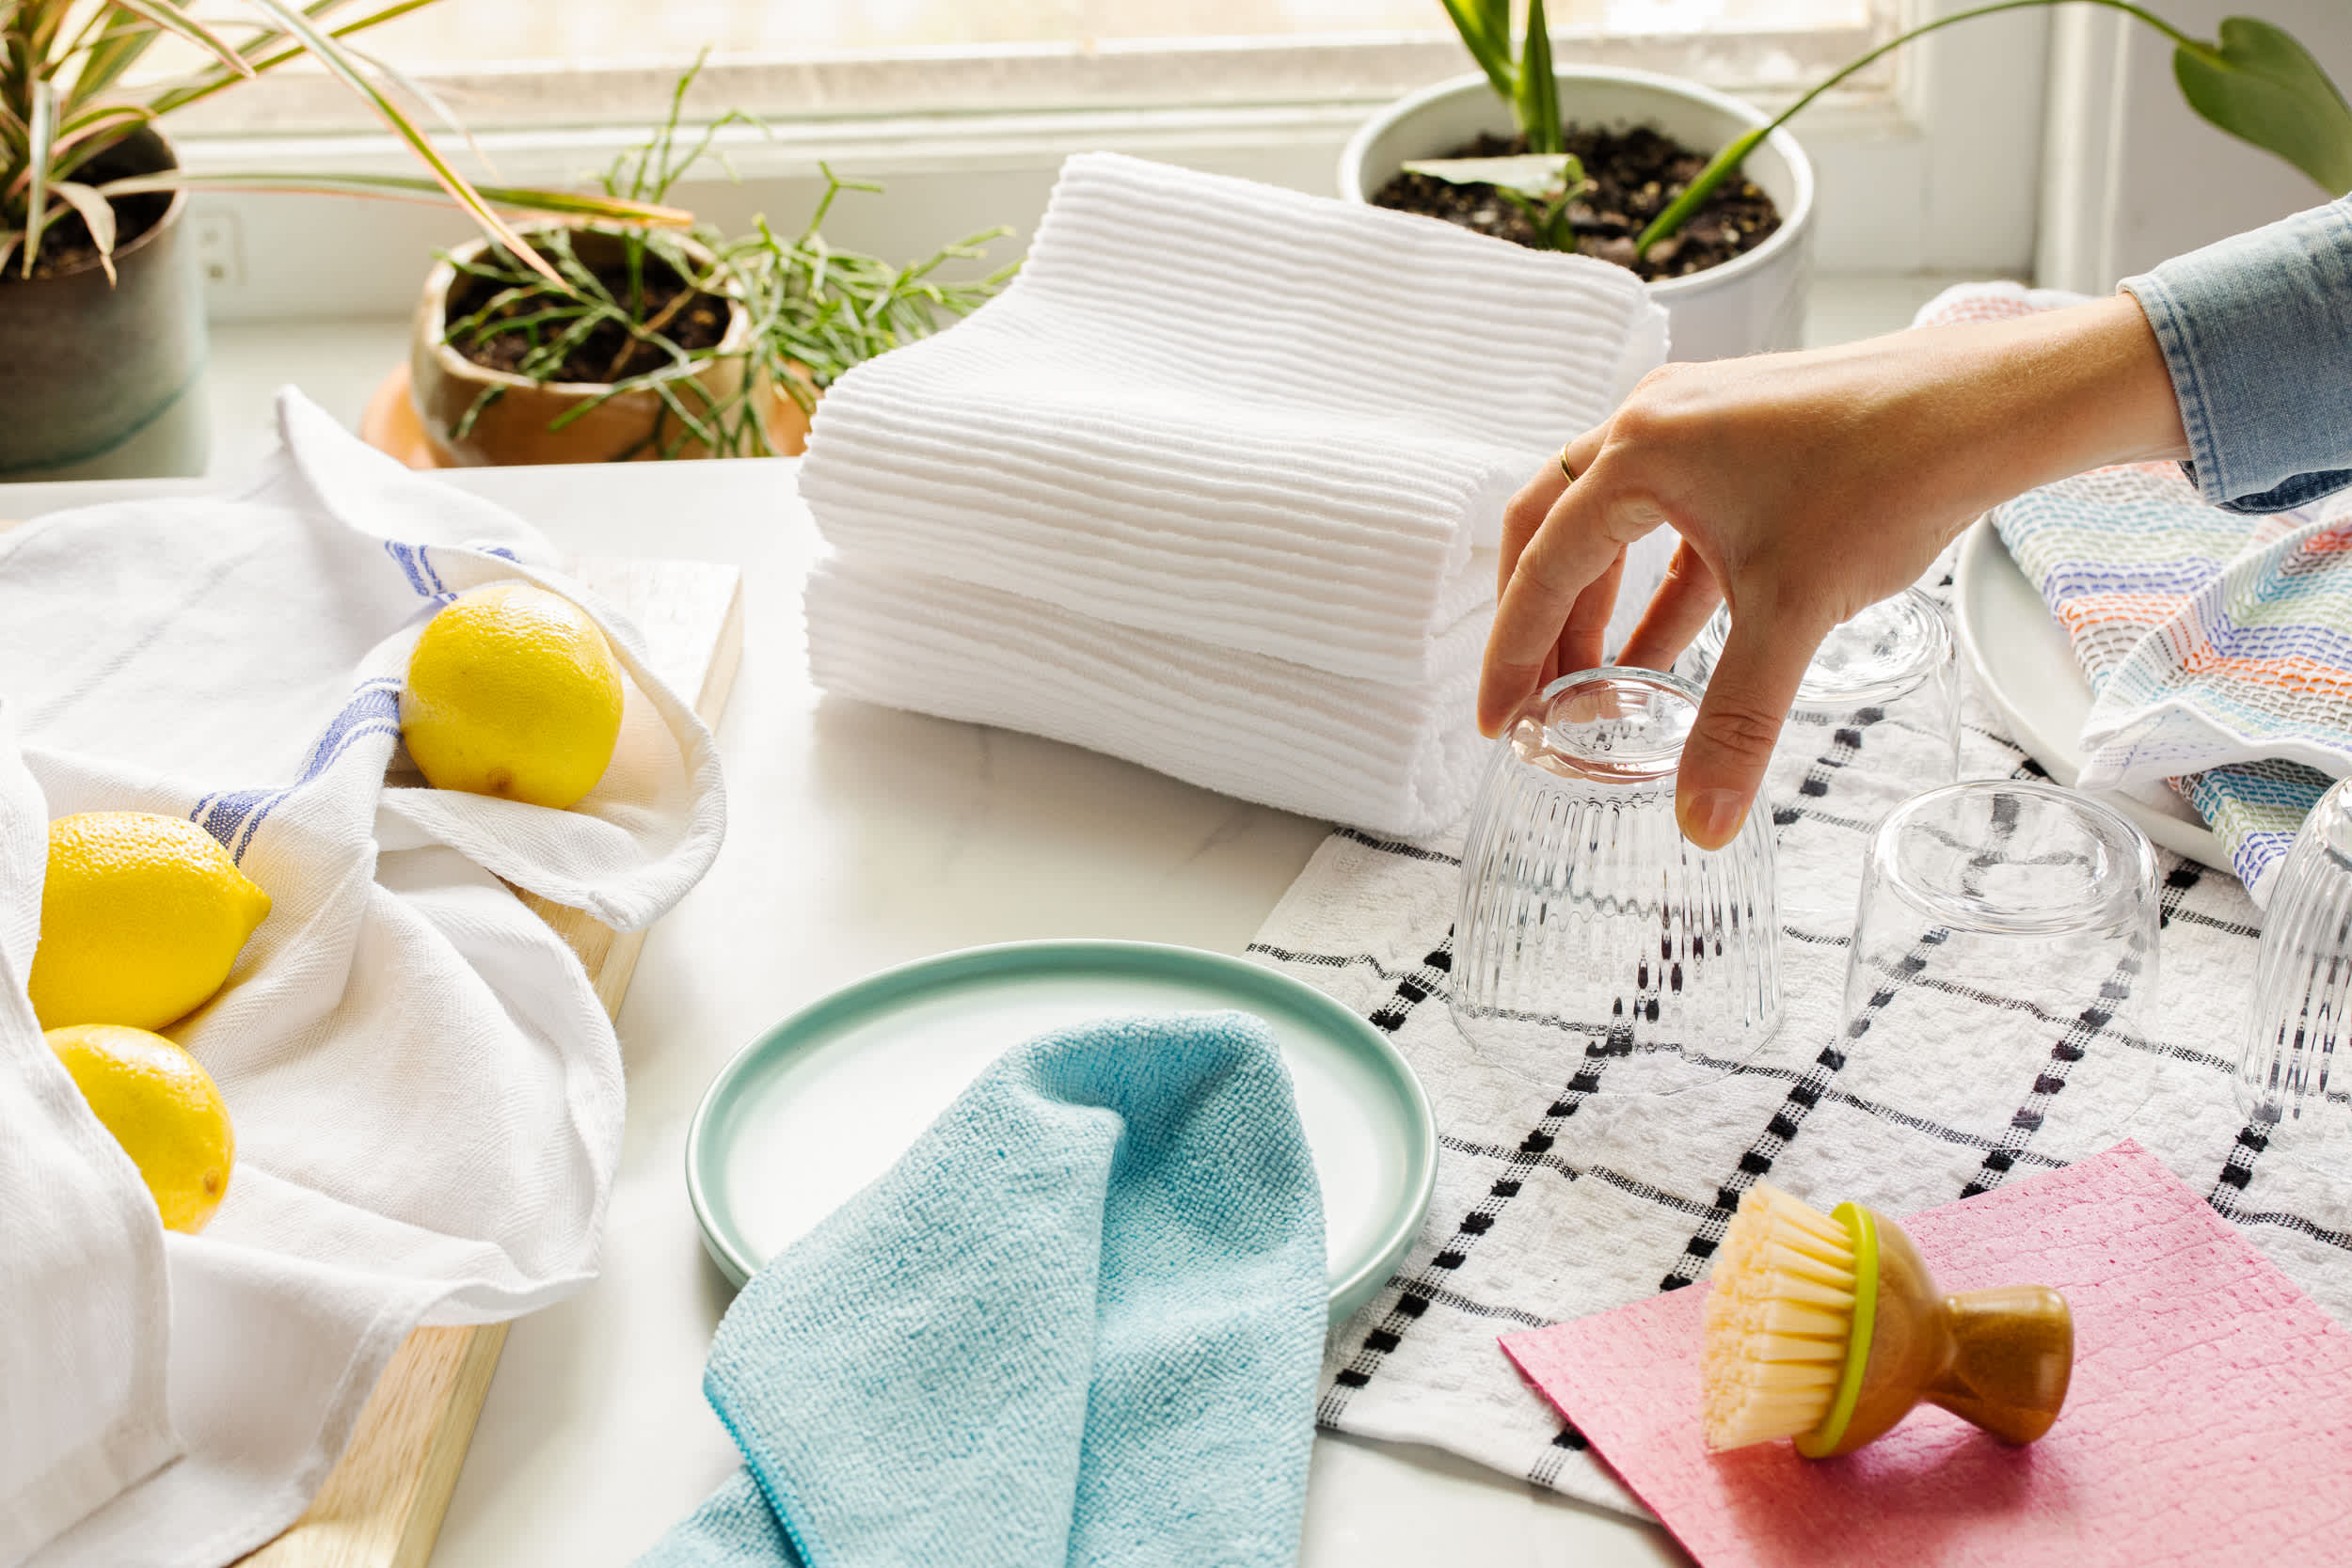 https://cdn.apartmenttherapy.info/image/upload/v1627940536/k/Photo/Lifestyle/2021-08-I-Tried-TK-Kitchen-Towels-These-Are-The-Ones-I%E2%80%99ll-Be-Buying-From-Now-On/Kitchn-2021-Kitchen-Towels-2.jpg